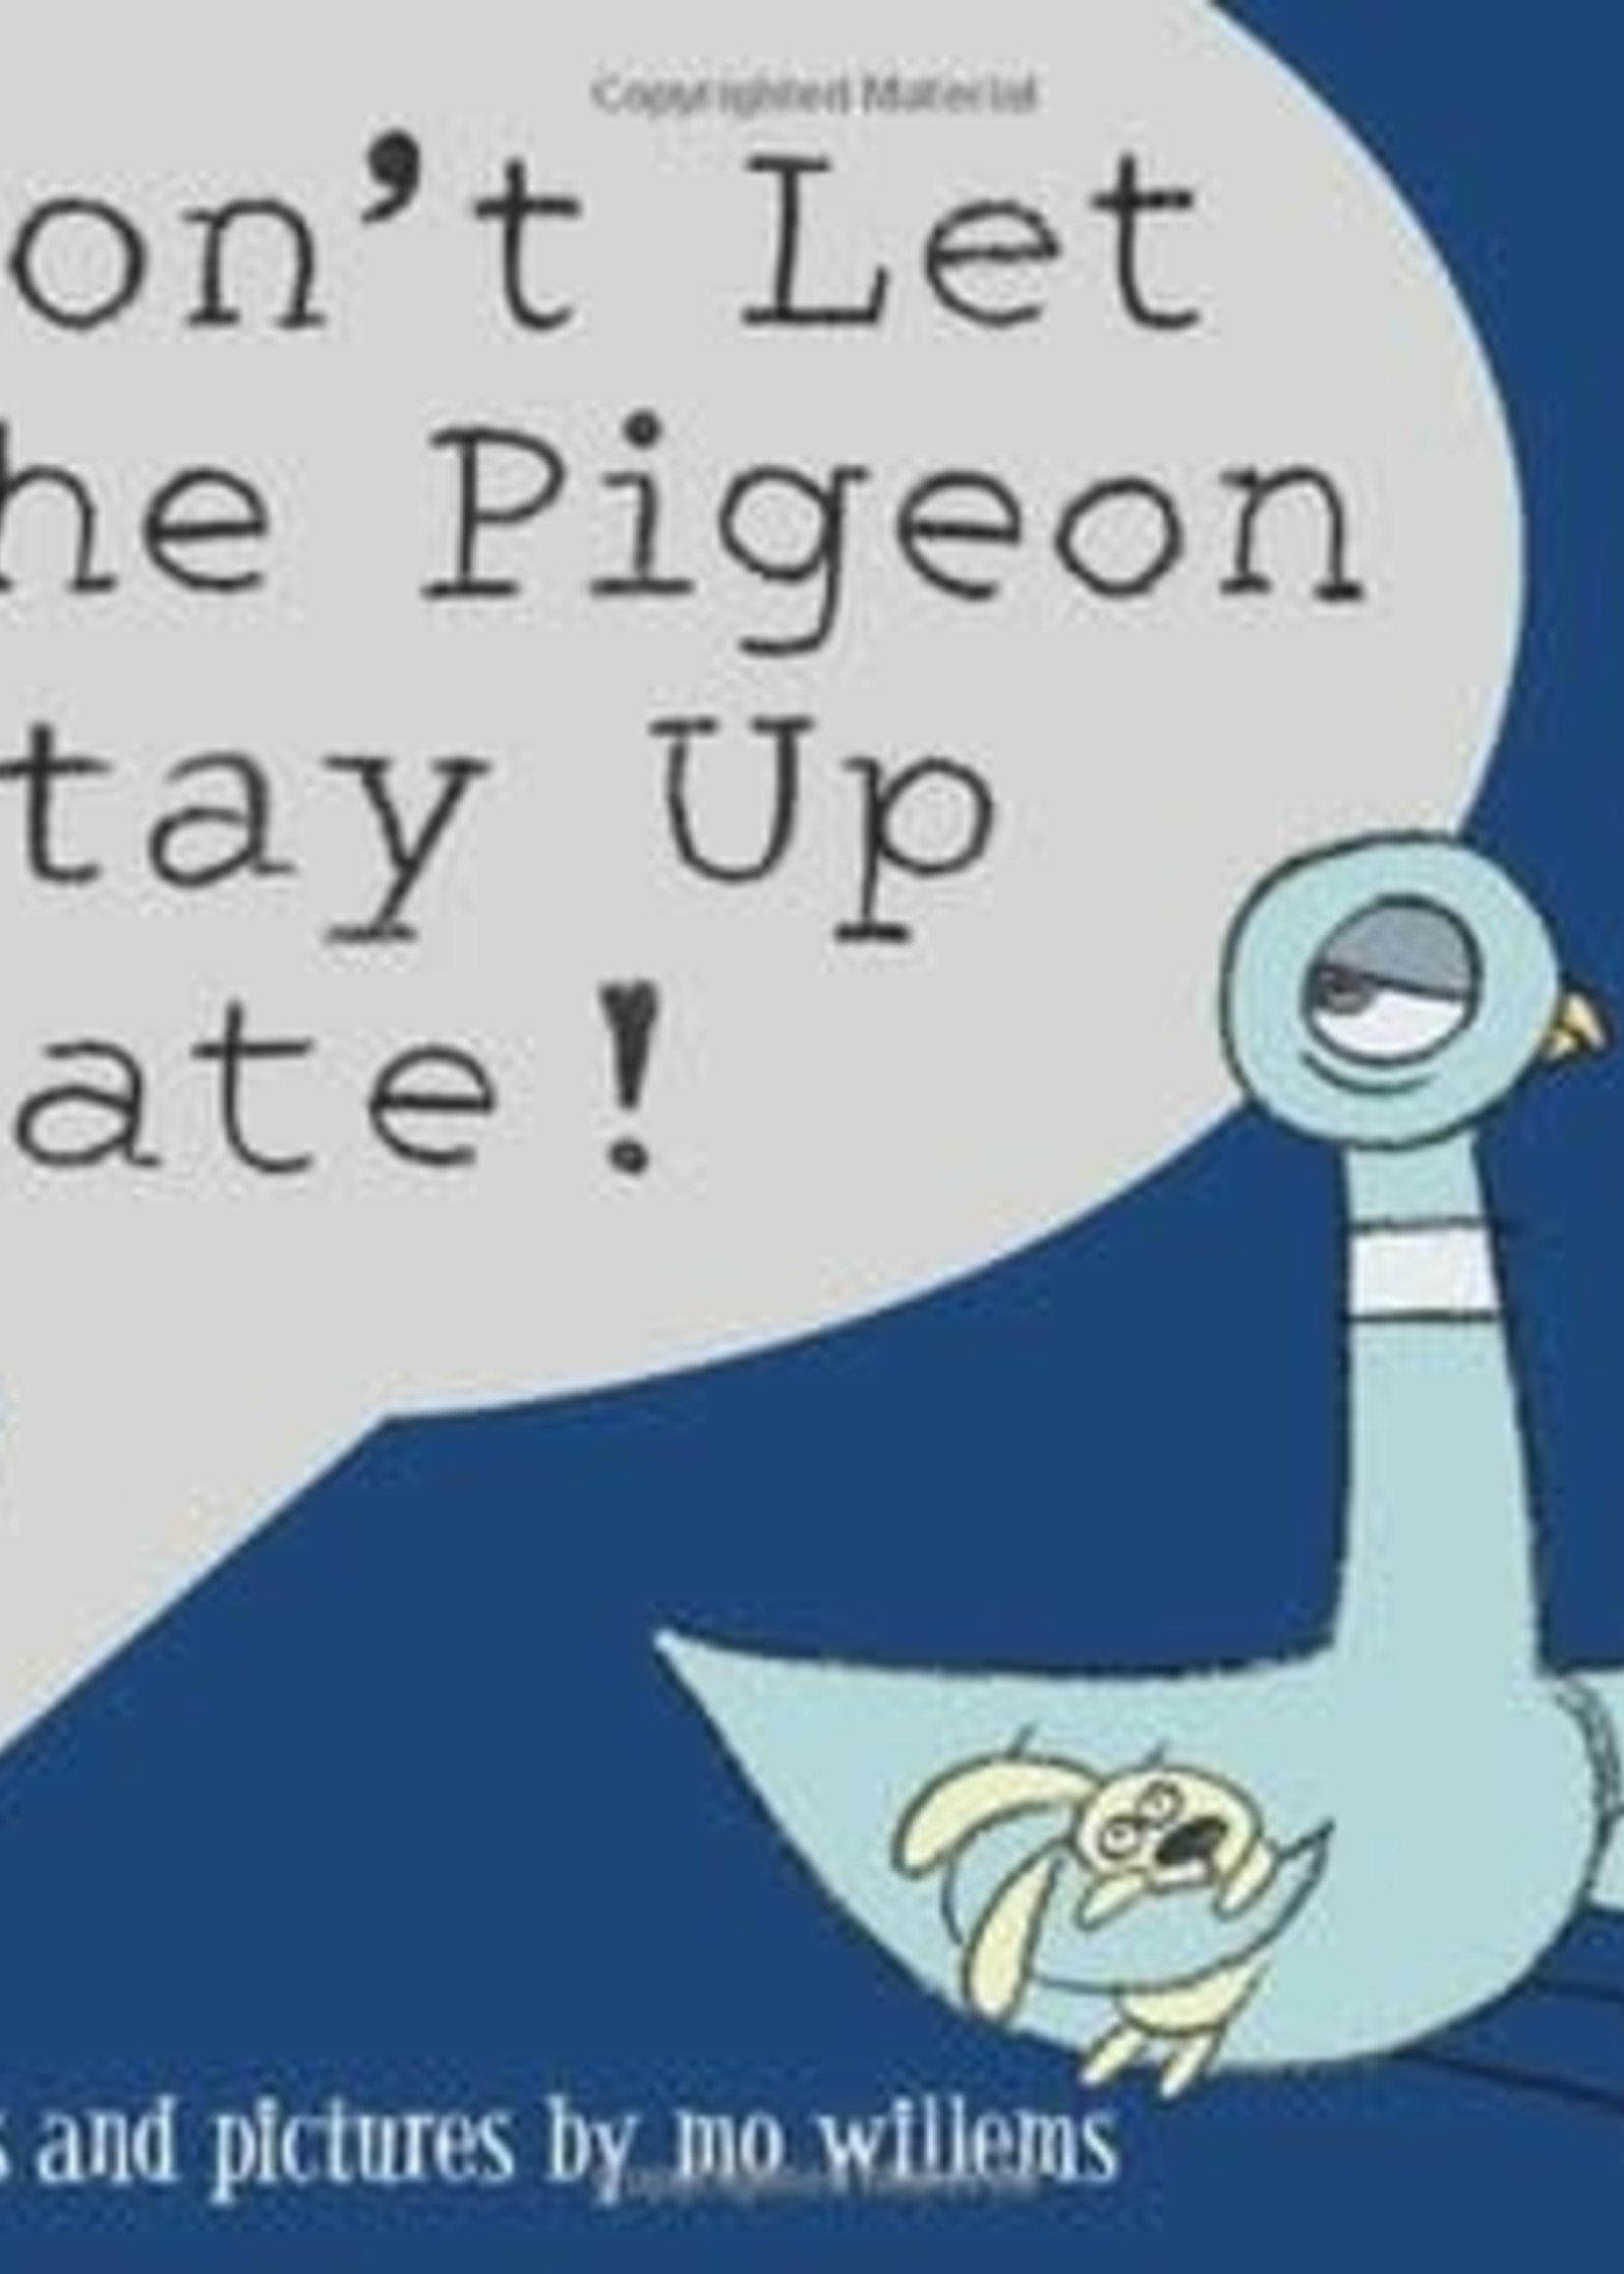 Don't Let the Pigeon Stay Up Late by Mo Willems